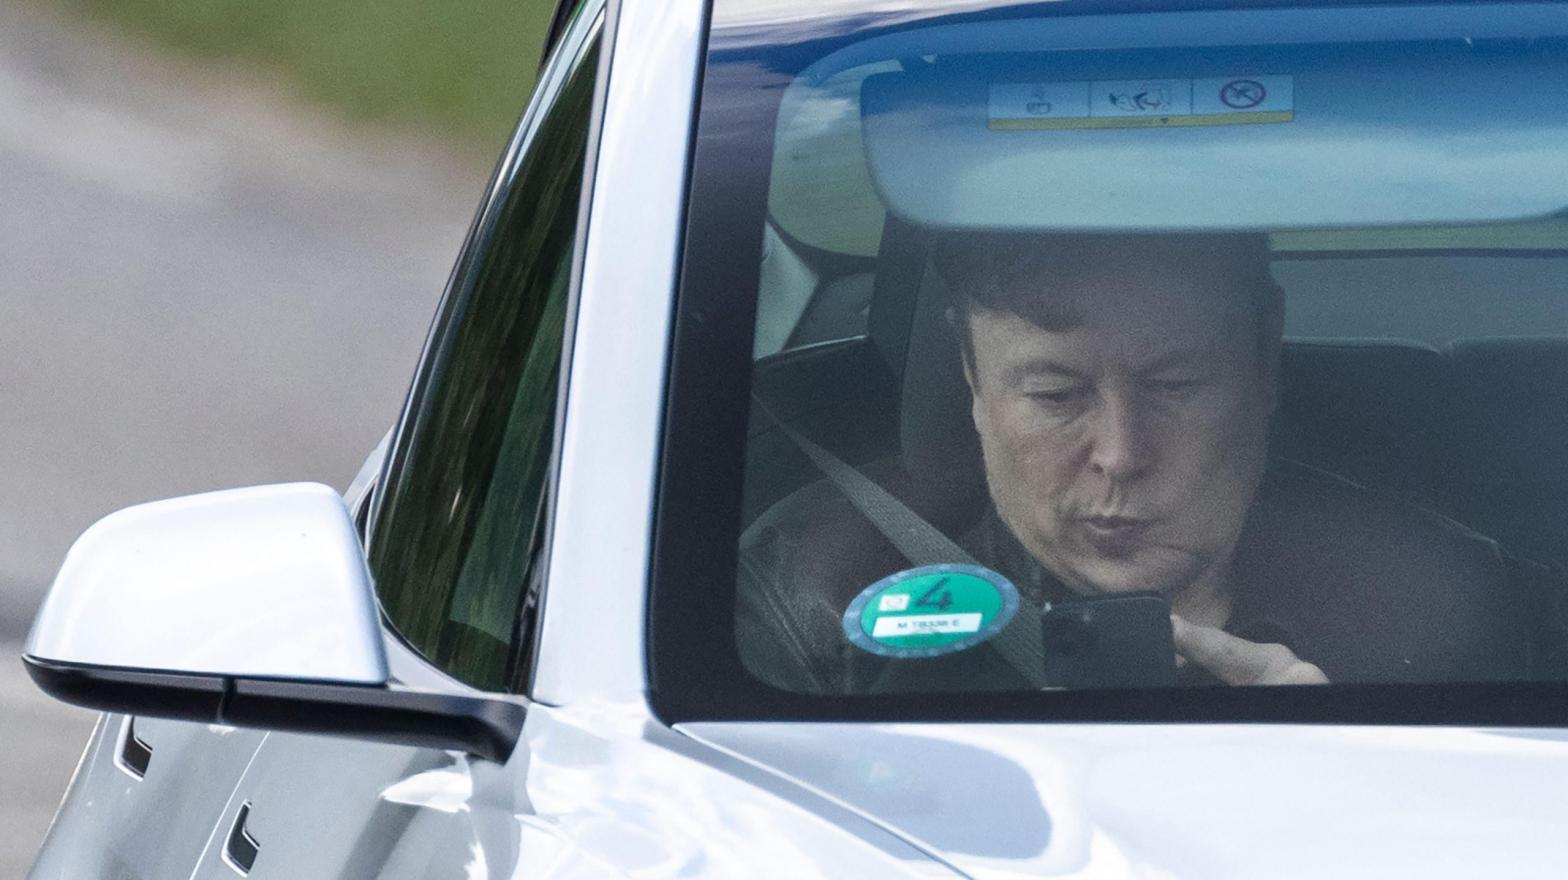 Tesla CEO Elon Musk sits in a car arriving to the construction site for a new Tesla in Gruenheide near Berlin, northeastern Germany on May 17, 2021. (Photo: Odd Andersen/AFP, Getty Images)